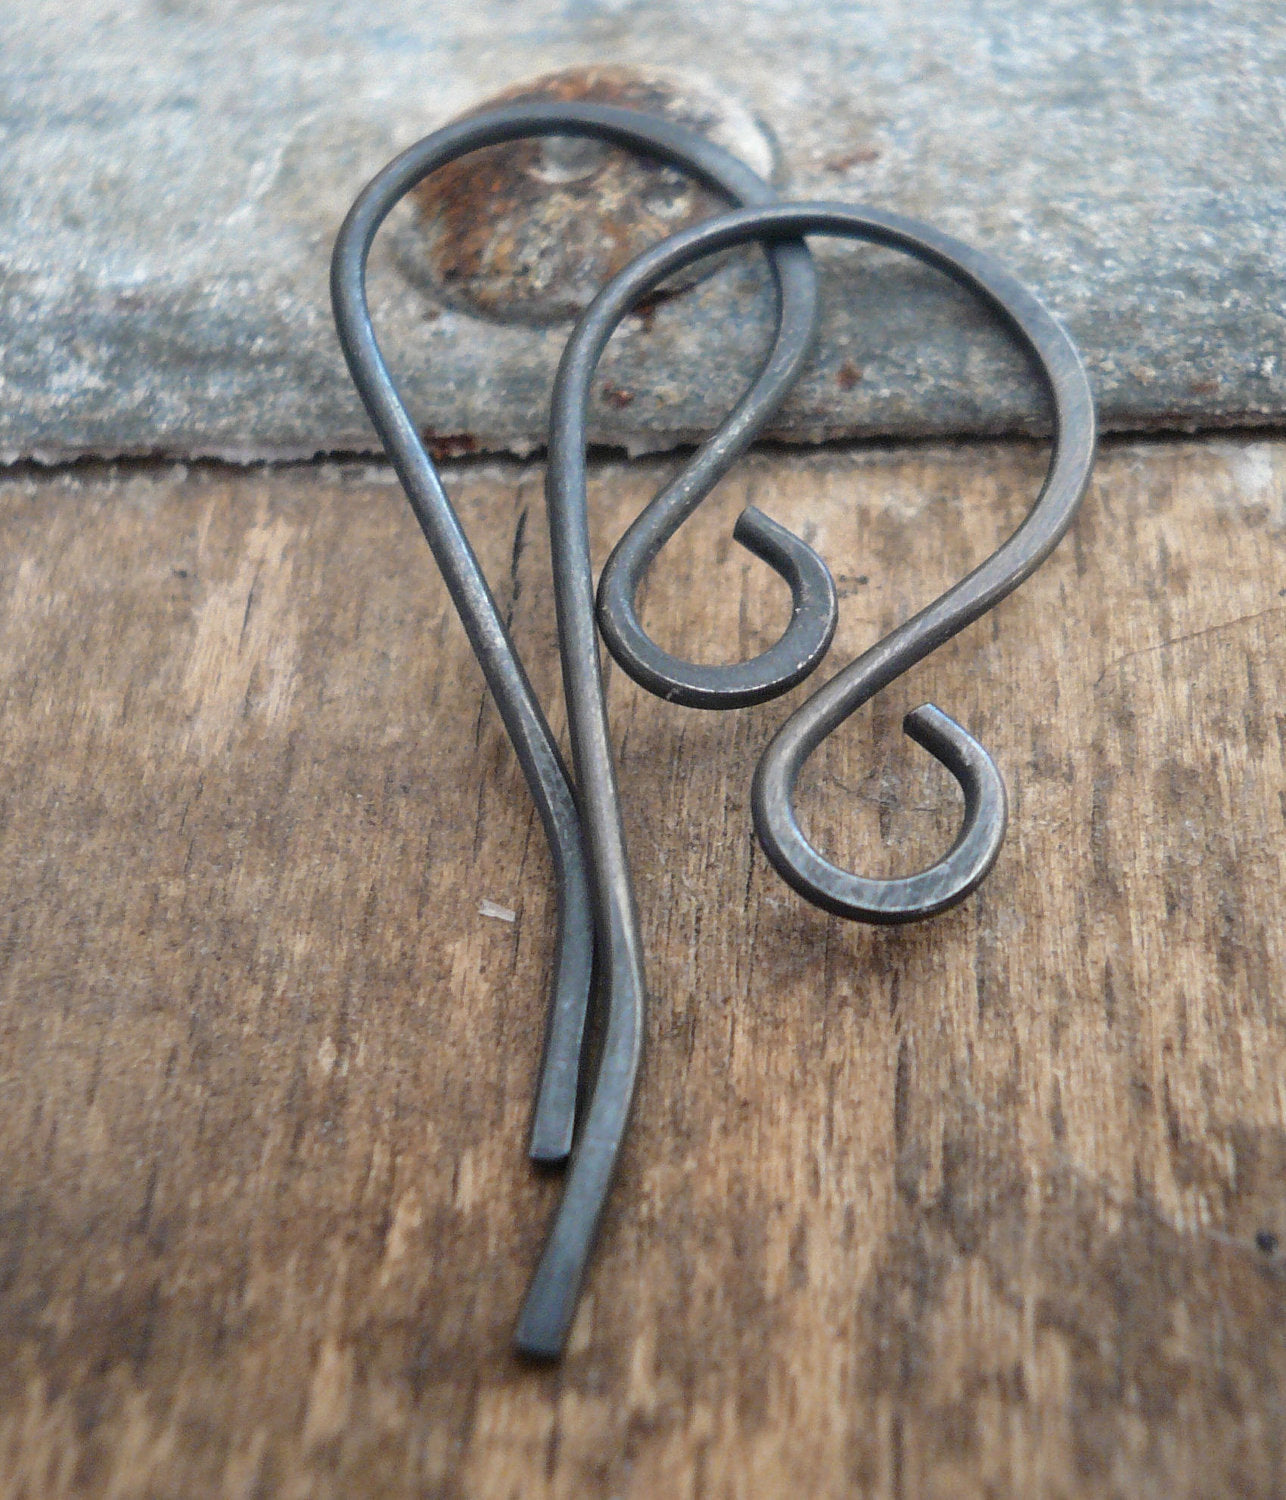 Solitaire Sterling Silver Earwires - Handmade. Heavily Oxidized